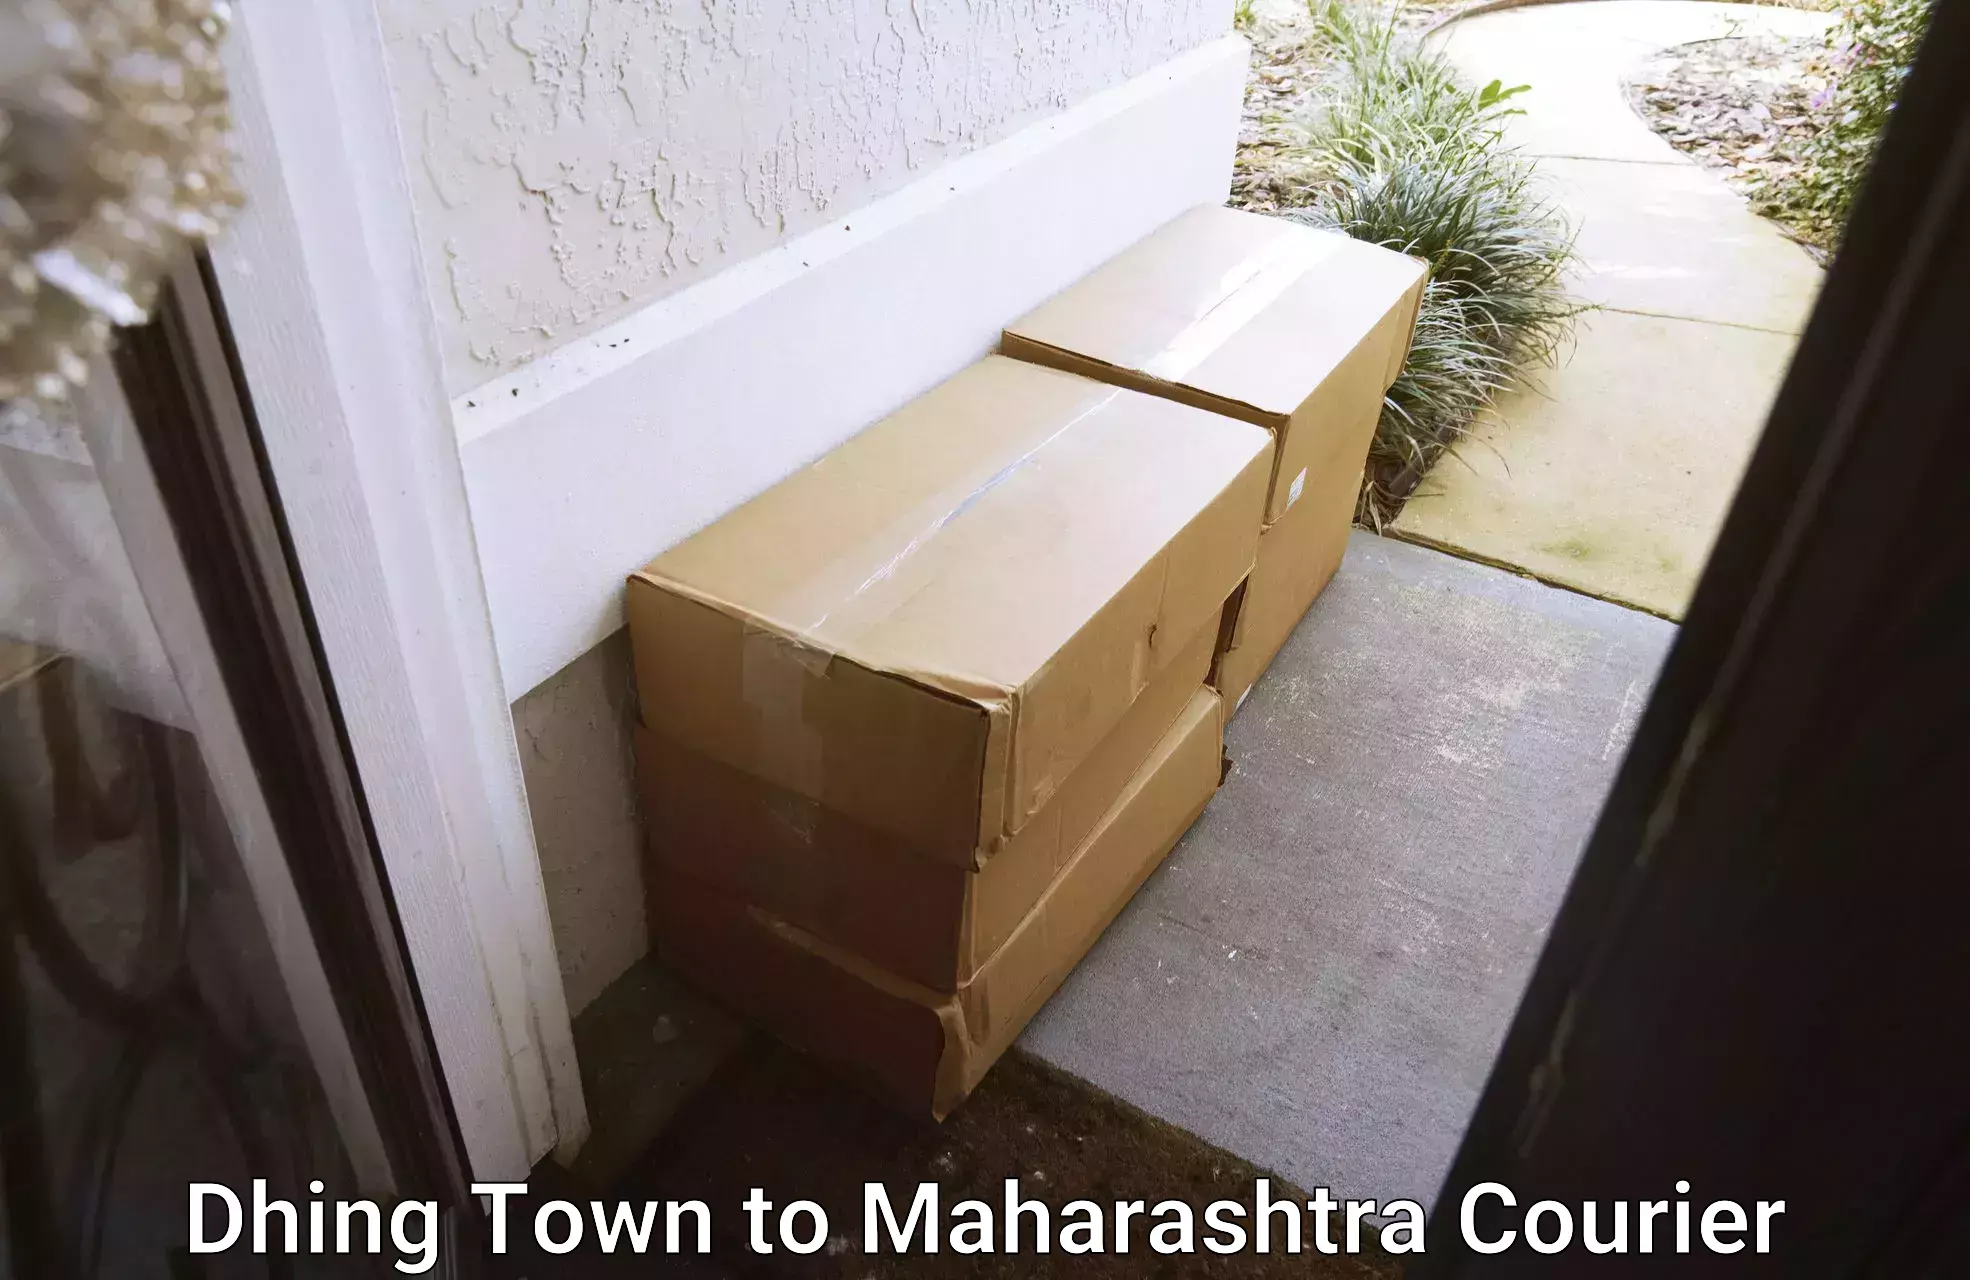 Expedited shipping methods in Dhing Town to Worli